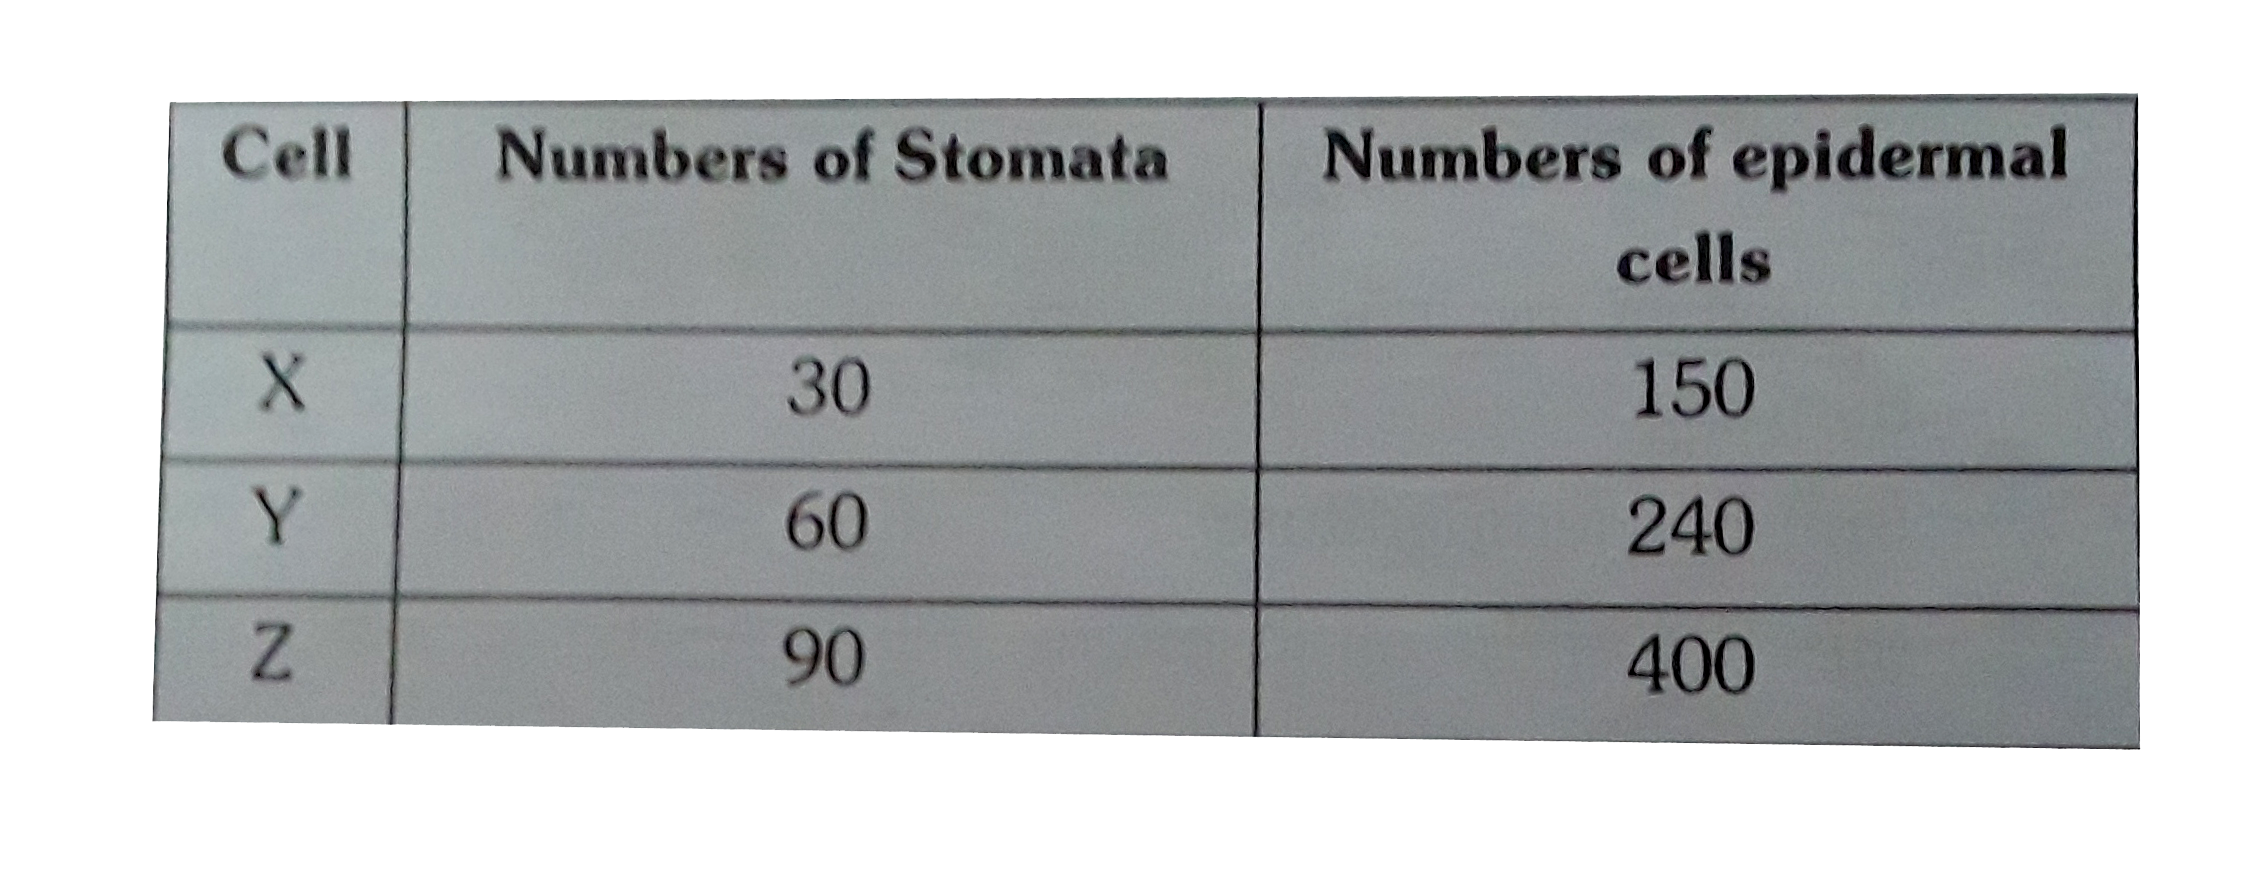 The number of stomata and epidermal cells in 1 mm^(2) leaf area of lower epidermis of the leaves X, Y and Z plants are given below. Arrange the plants in decreasing order of their stomatal index.   The correct answer is